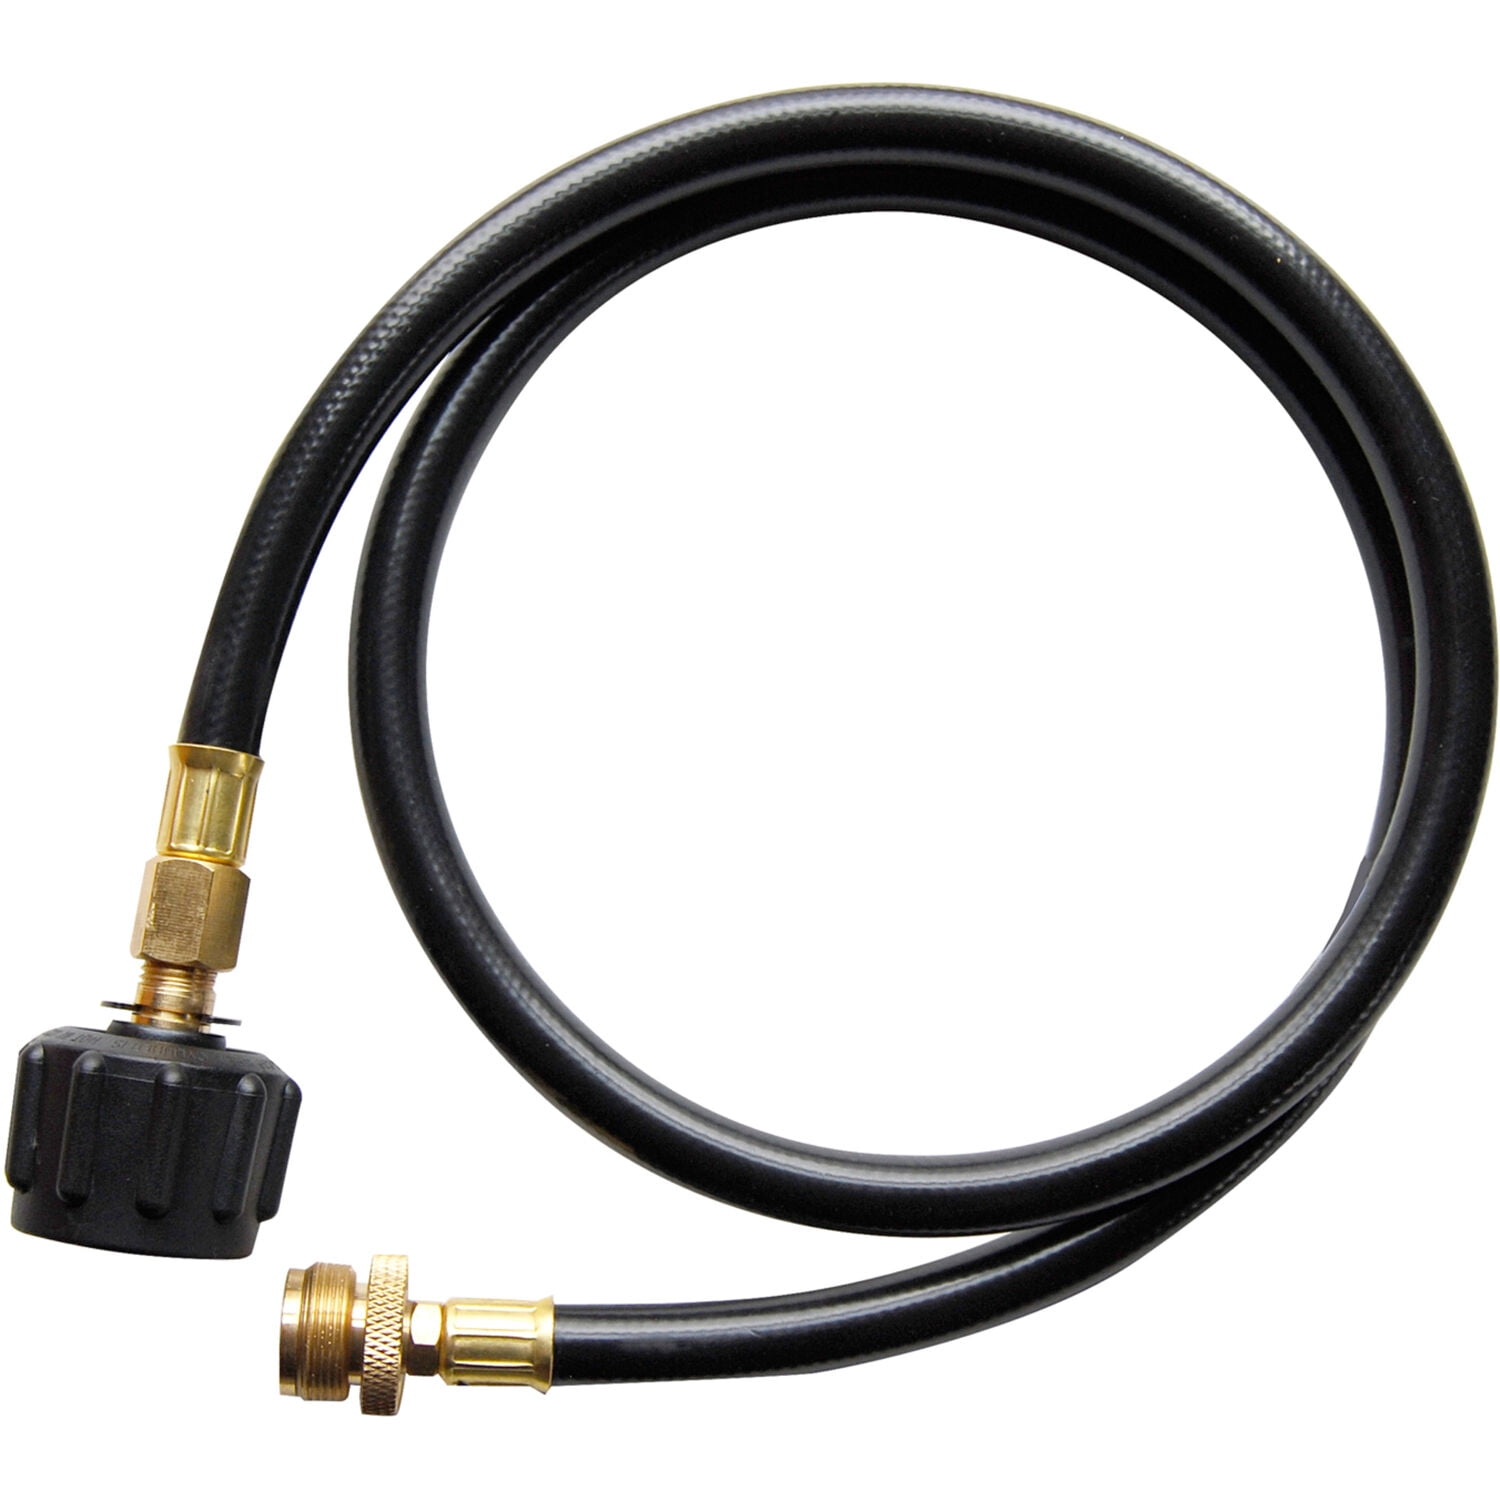 Char-Broil 4-Foot Hose and Adapter 